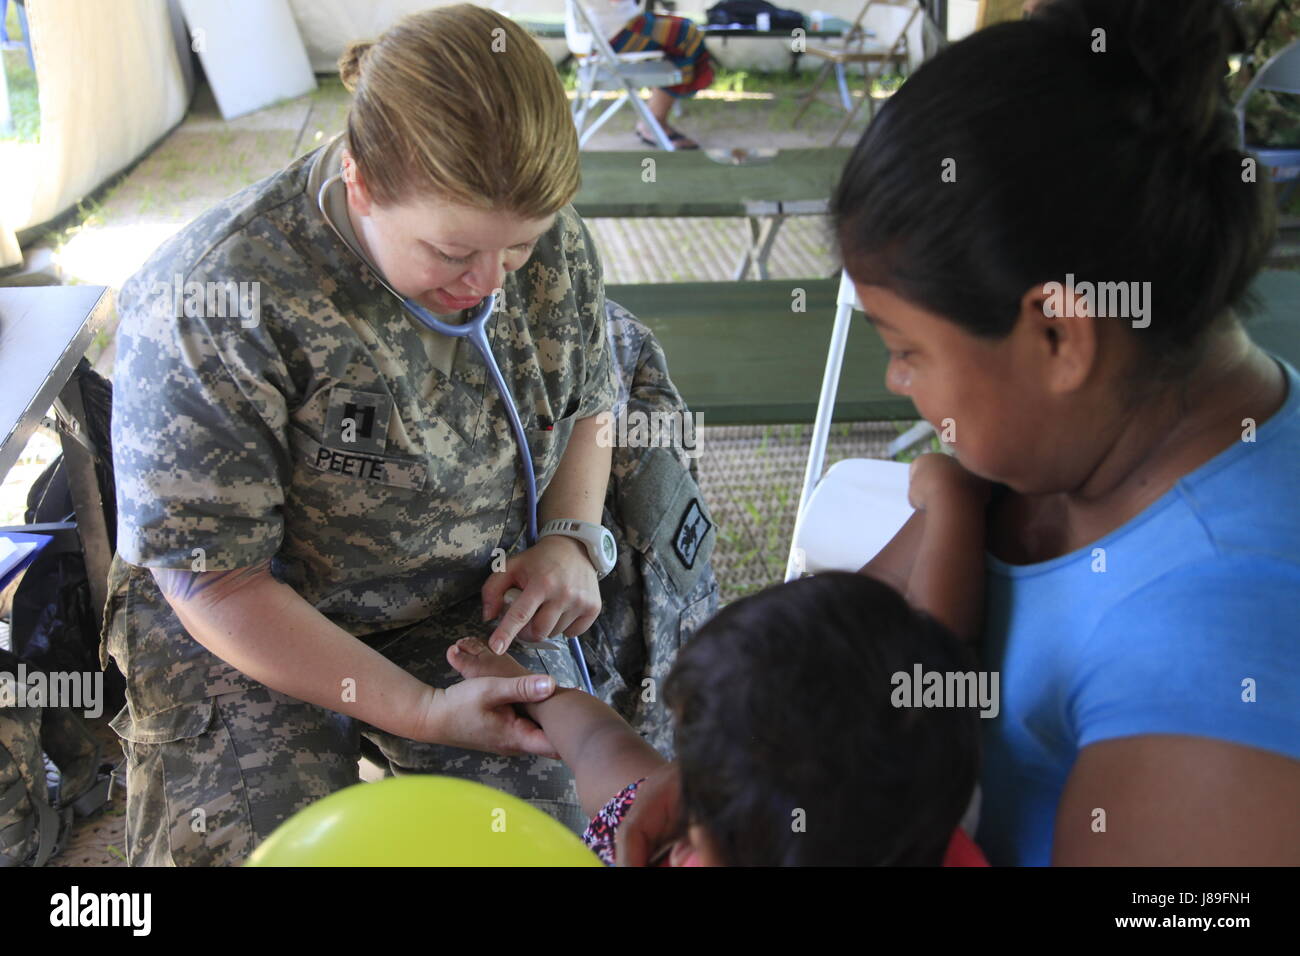 U.S. Army Capt. Stephanie Peete, with the Wyoming National Guard Medical Detachment, performs a check up on a patient at a medical readiness event during Beyond the Horizon 2017, in San Ignacio, Belize, May 15, 2017. BTH 2017 is a U.S. Southern Command-sponsored, Army South-led exercise designed to provide humanitarian and engineering services to communities in need, demonstrating U.S. support for Belize. (U.S. Army photo by Spc. Kelson Brooks) (RELEASED) Stock Photo